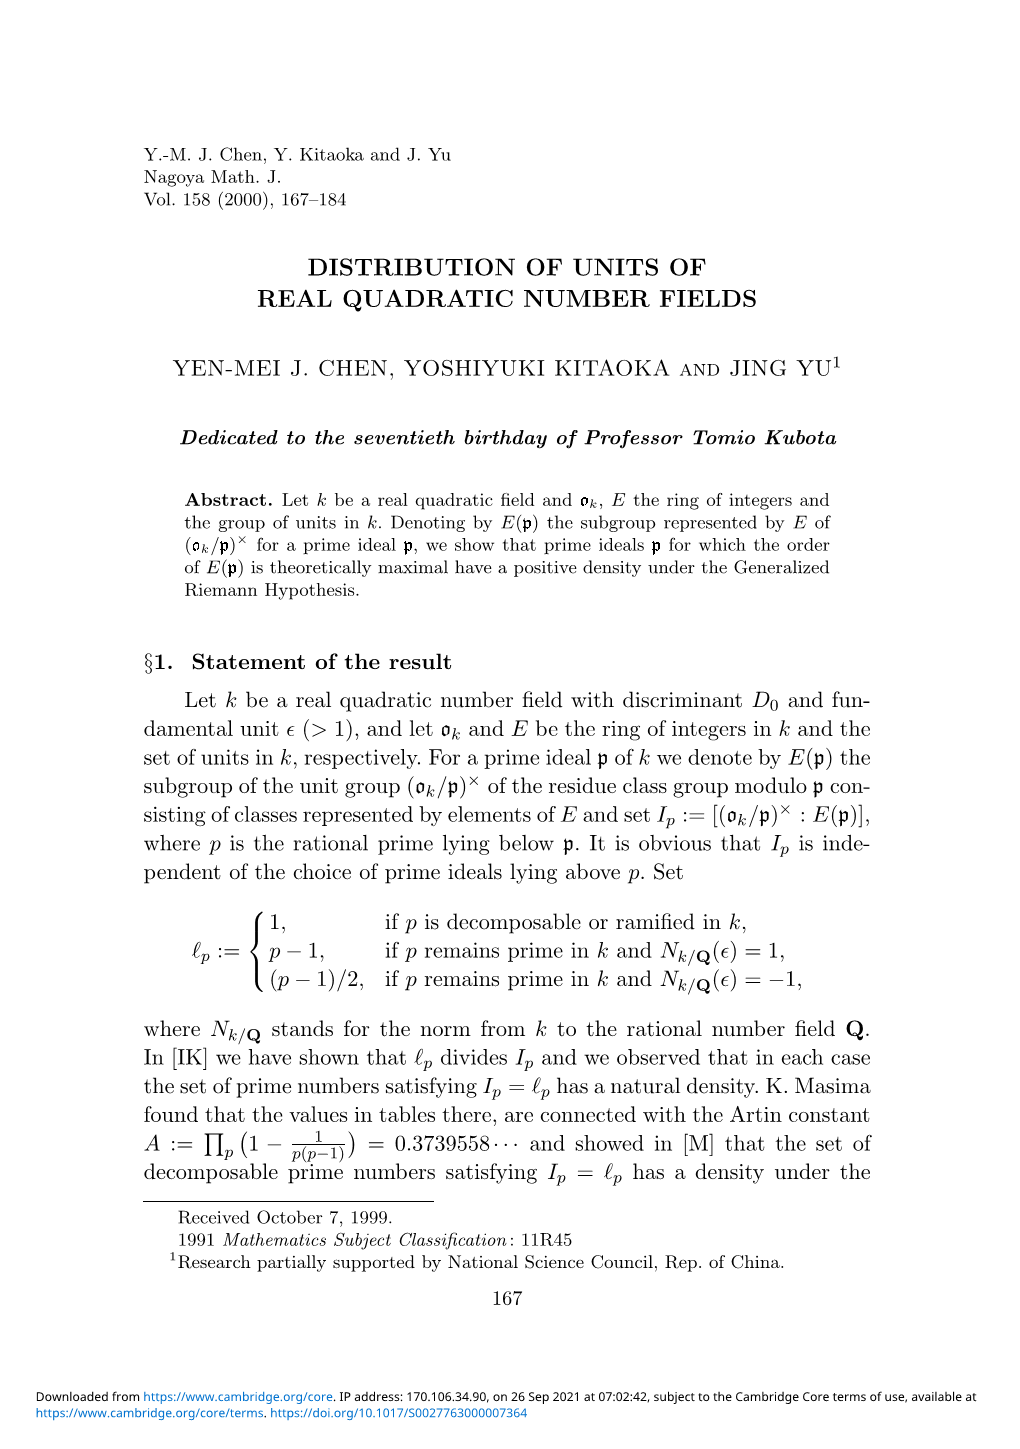 Distribution of Units of Real Quadratic Number Fields